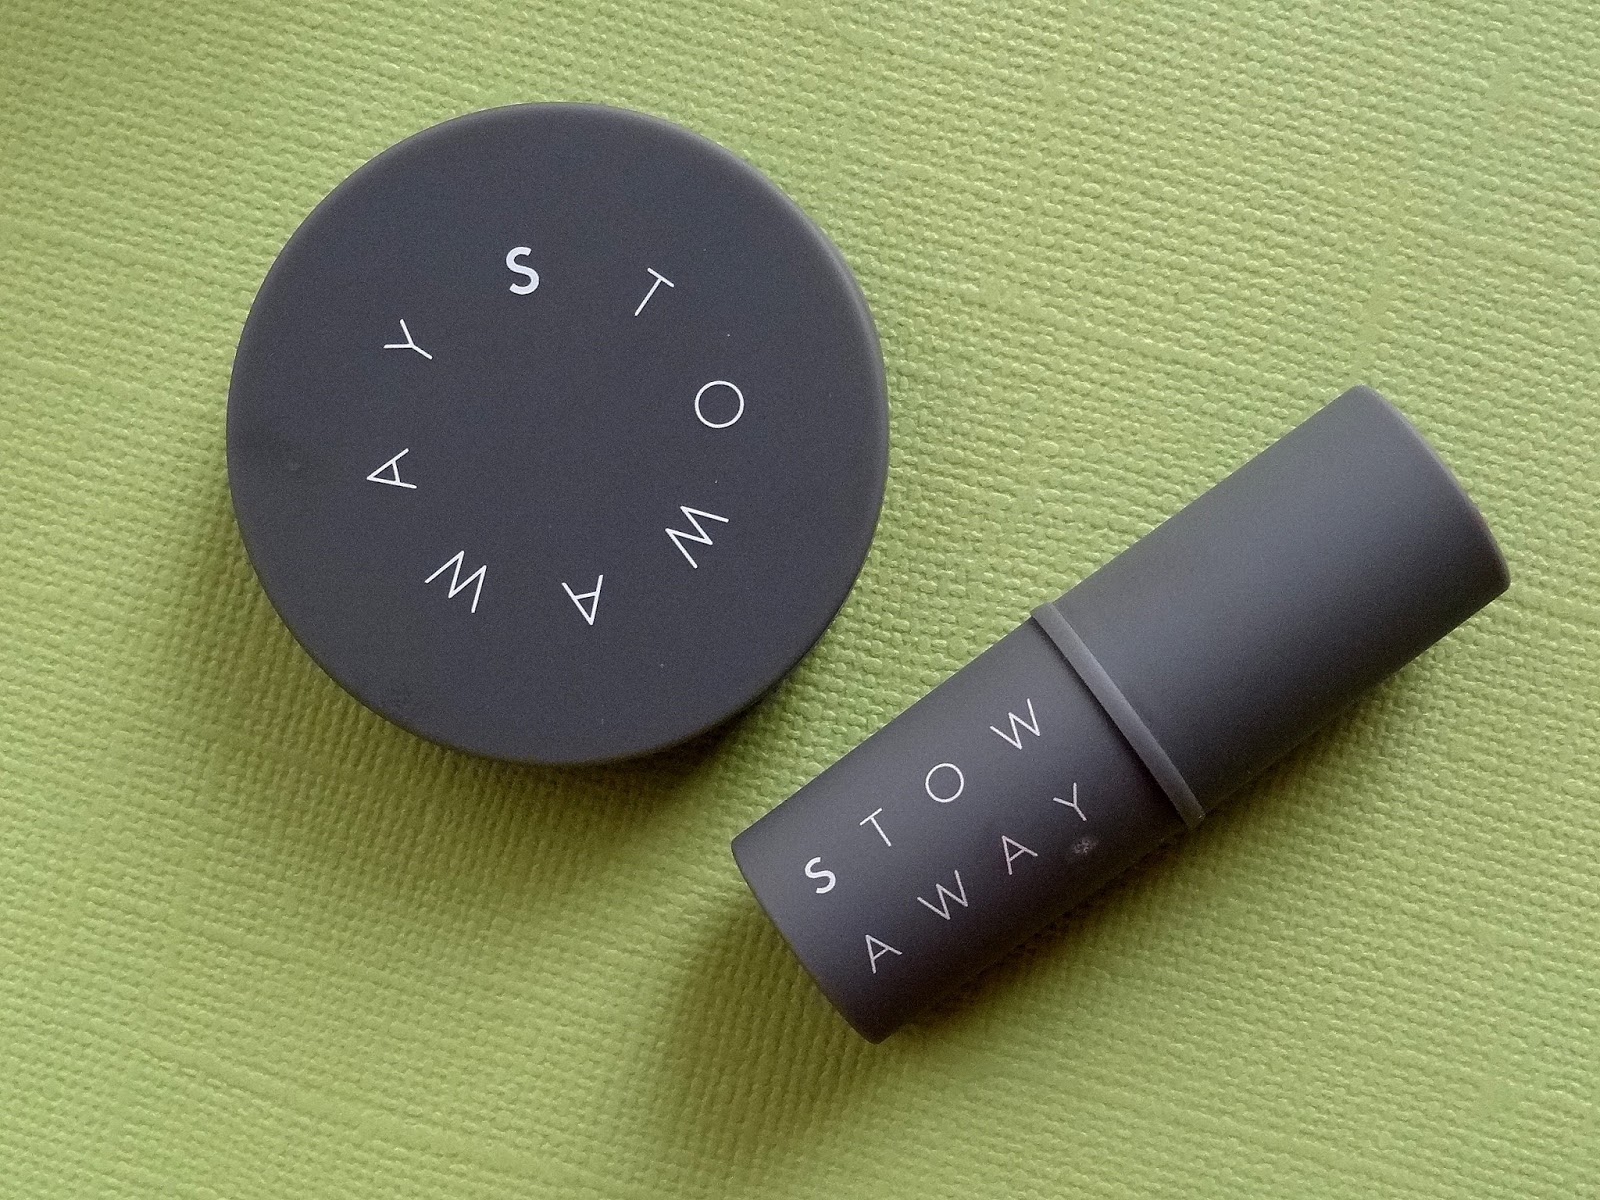 Stowaway Cosmetics Creme Lipstick in Scarlet and Cheek and Lip Rouge in Burnt Rose Review, Photos, Swatches